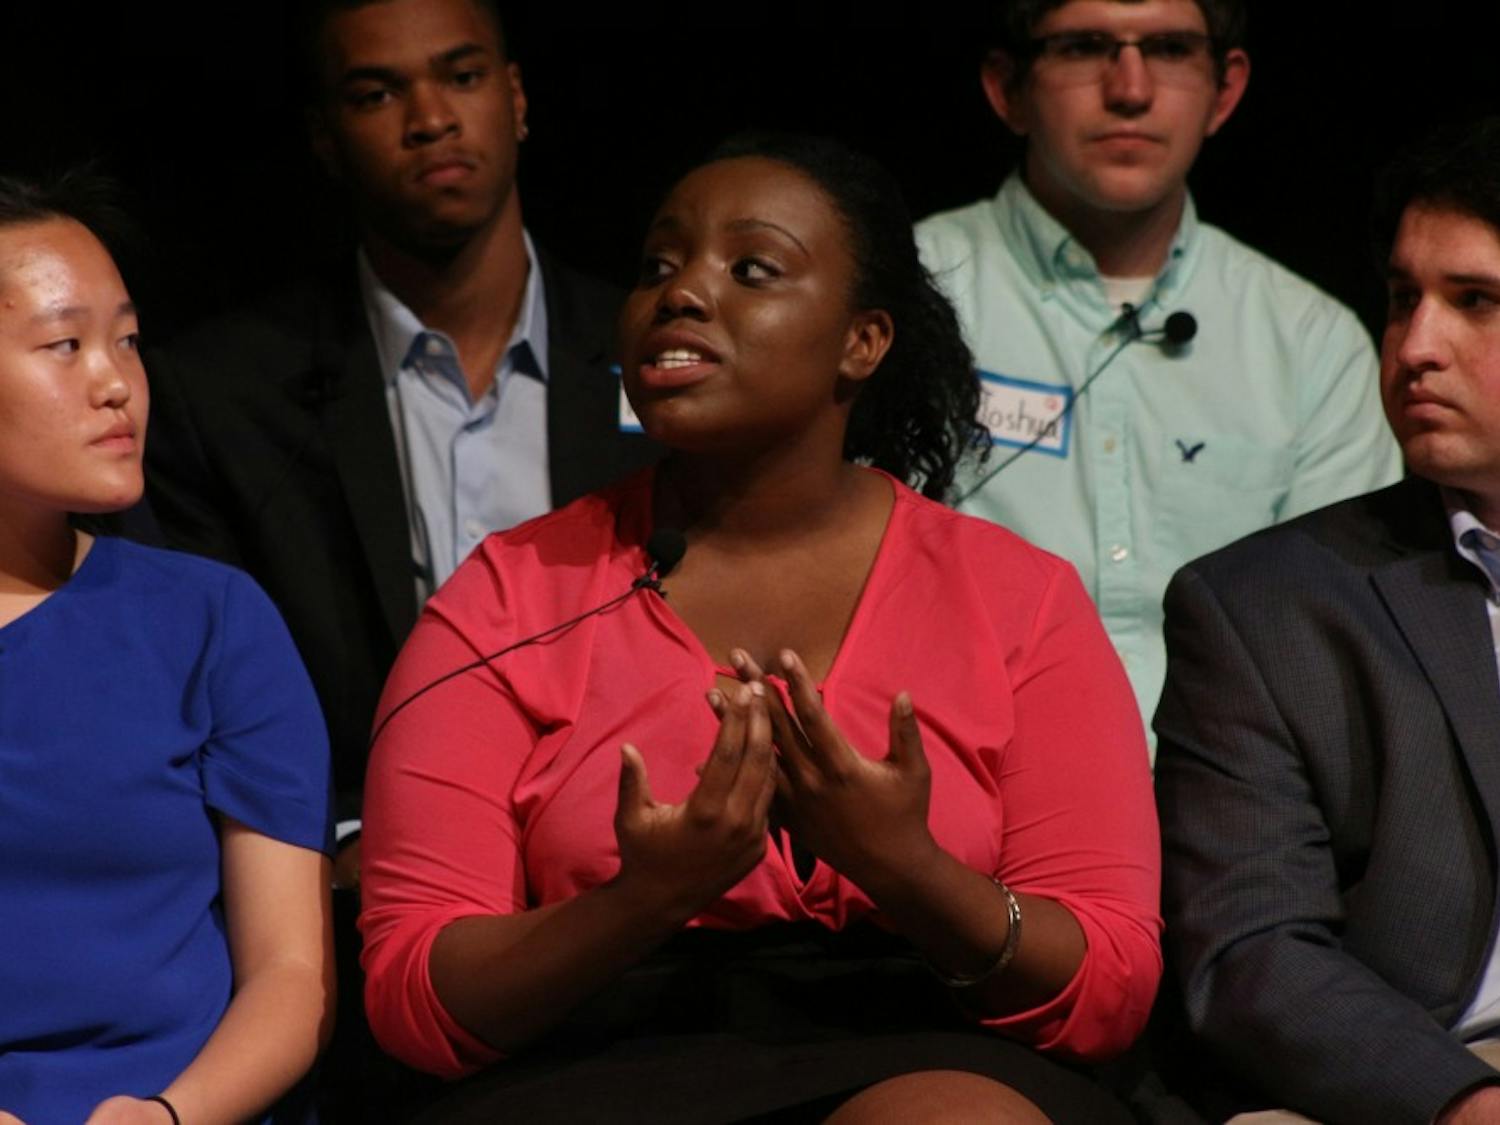 Raleigh Charter High School Senior Kari Degraffenreid voices her opinion on gun violence at the Reverse Town Hall in the Stone Center on April 22.